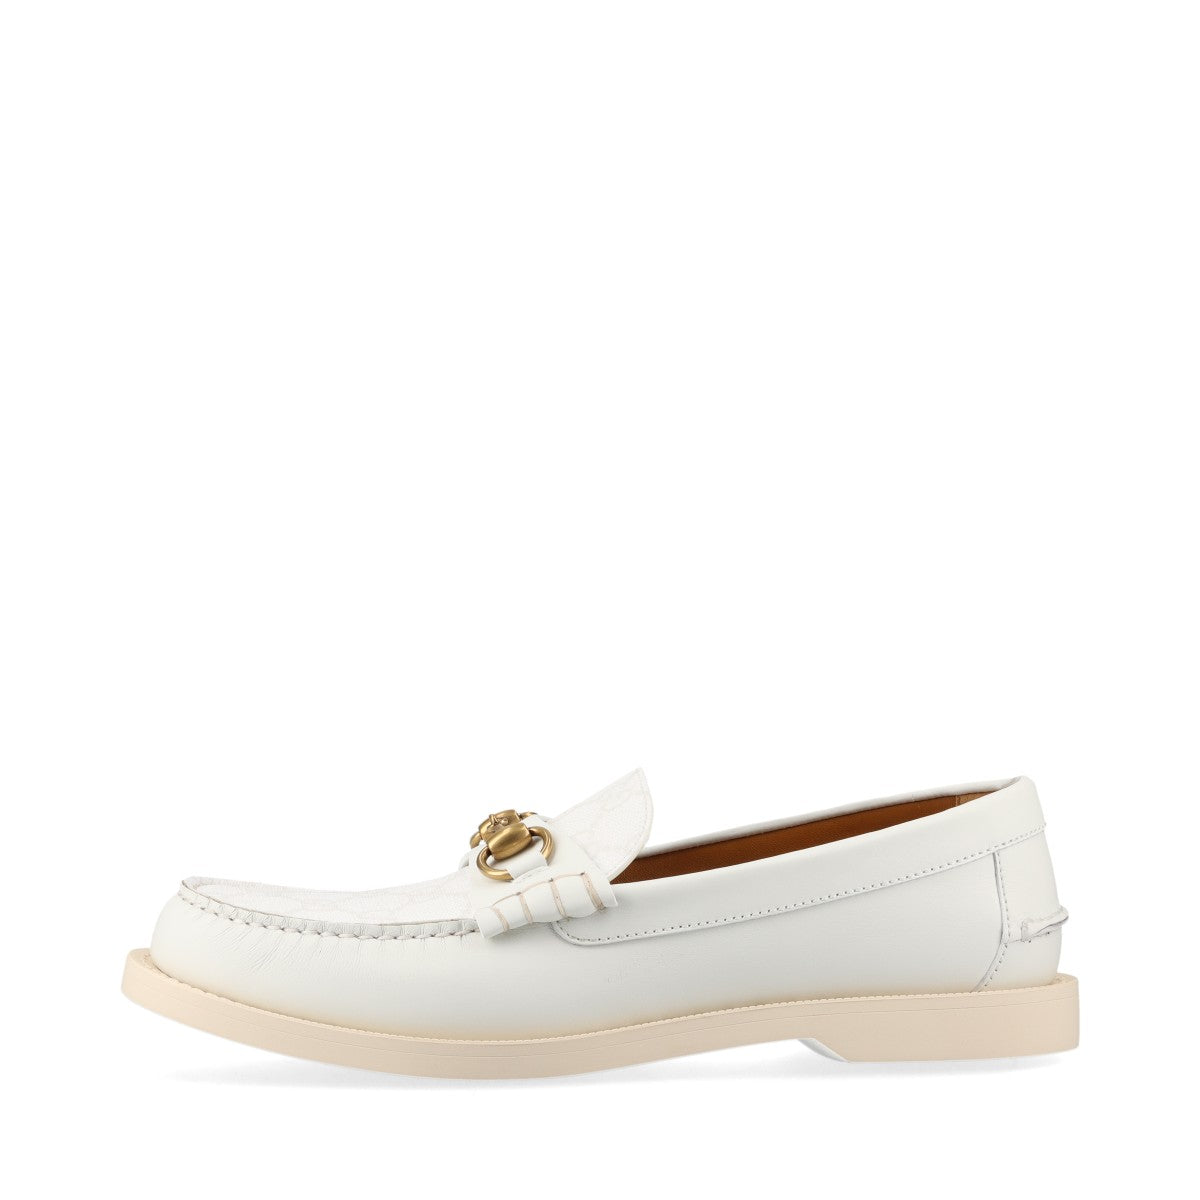 Gucci Horsebit PVC & leather Loafer US6 1/2 Men's White 695049 GG Supreme Box There is a bag